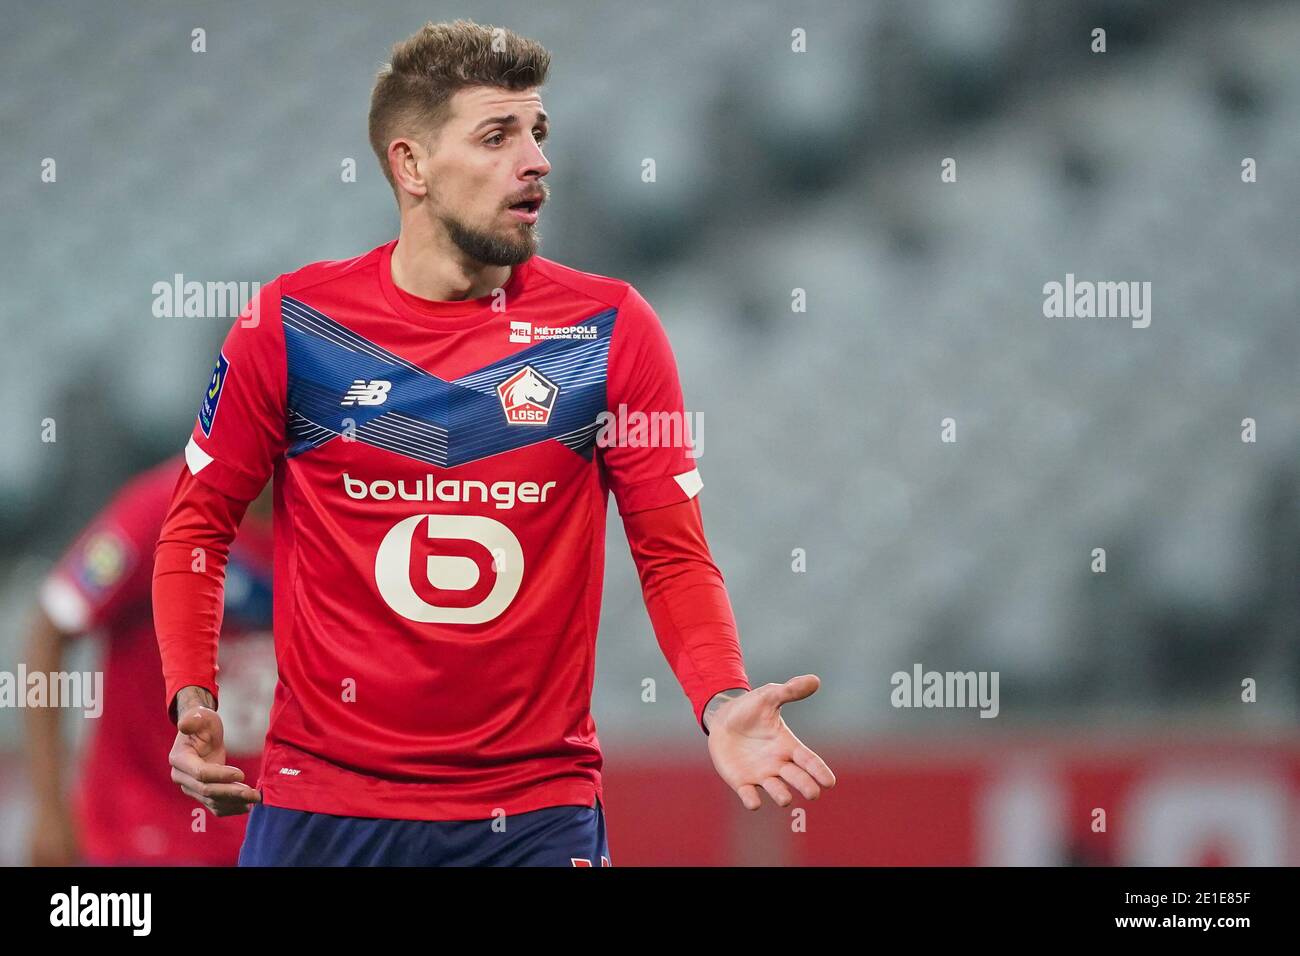 LILLE, FRANCE - JANUARY 6: Xeka of Lille OSC during the Ligue 1 match between Lille OSC and Angers SCO at Stade Pierre Mauroy on January 6, 2021 in Lille, France (Photo by Jeroen Meuwsen/BSR Agency/Alamy Live News)*** Local Caption *** Xeka Stock Photo